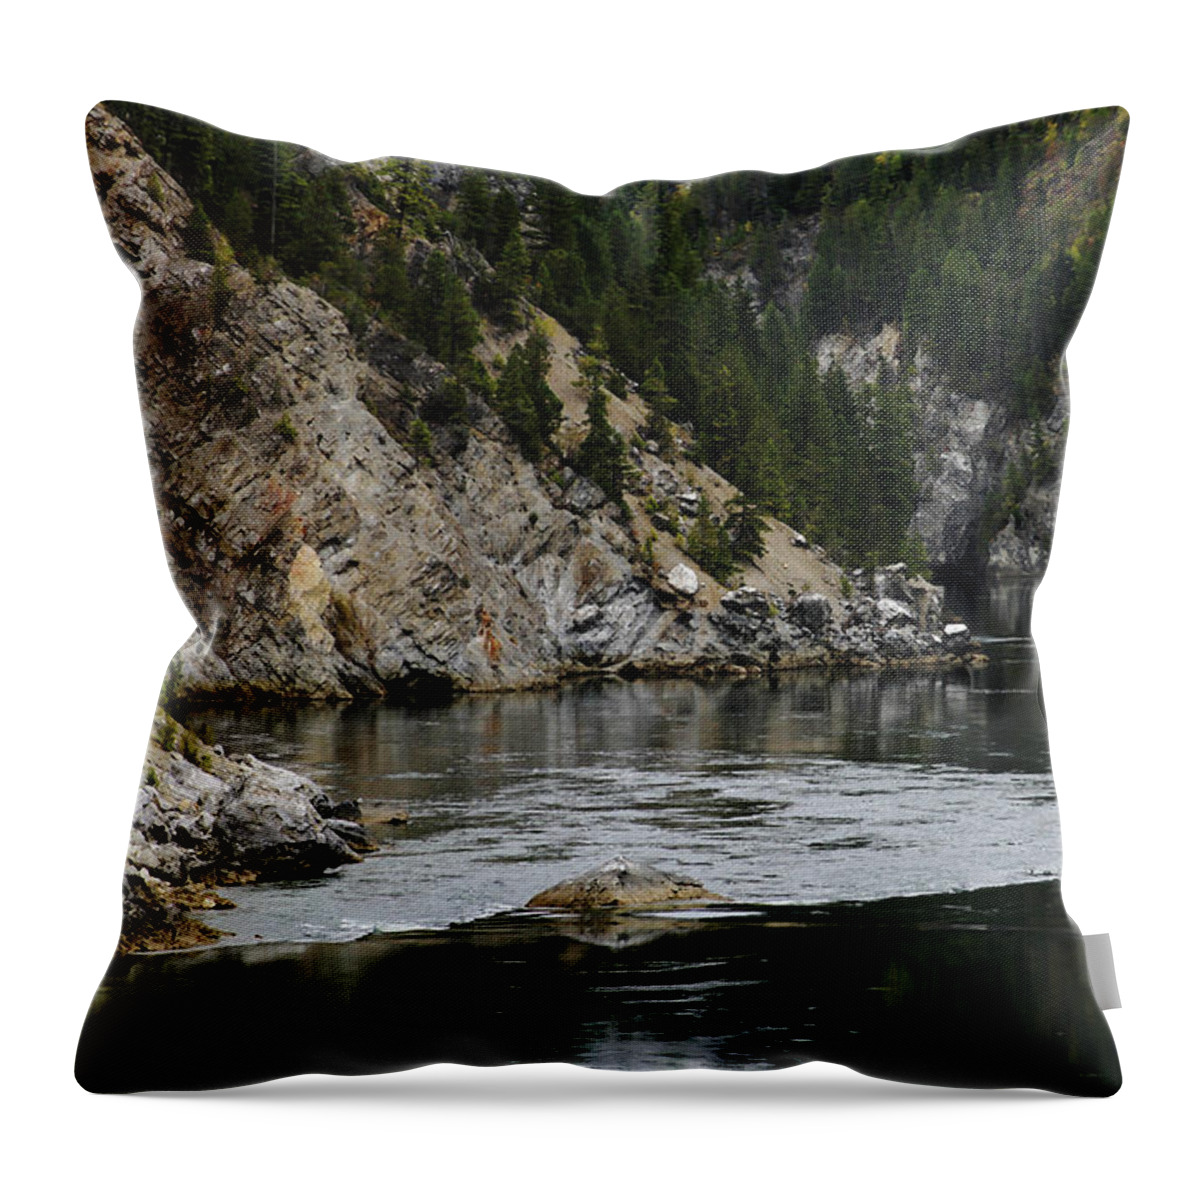 Pend Oreille River Throw Pillow featuring the photograph Pend Oreille in Oil by Joseph Noonan